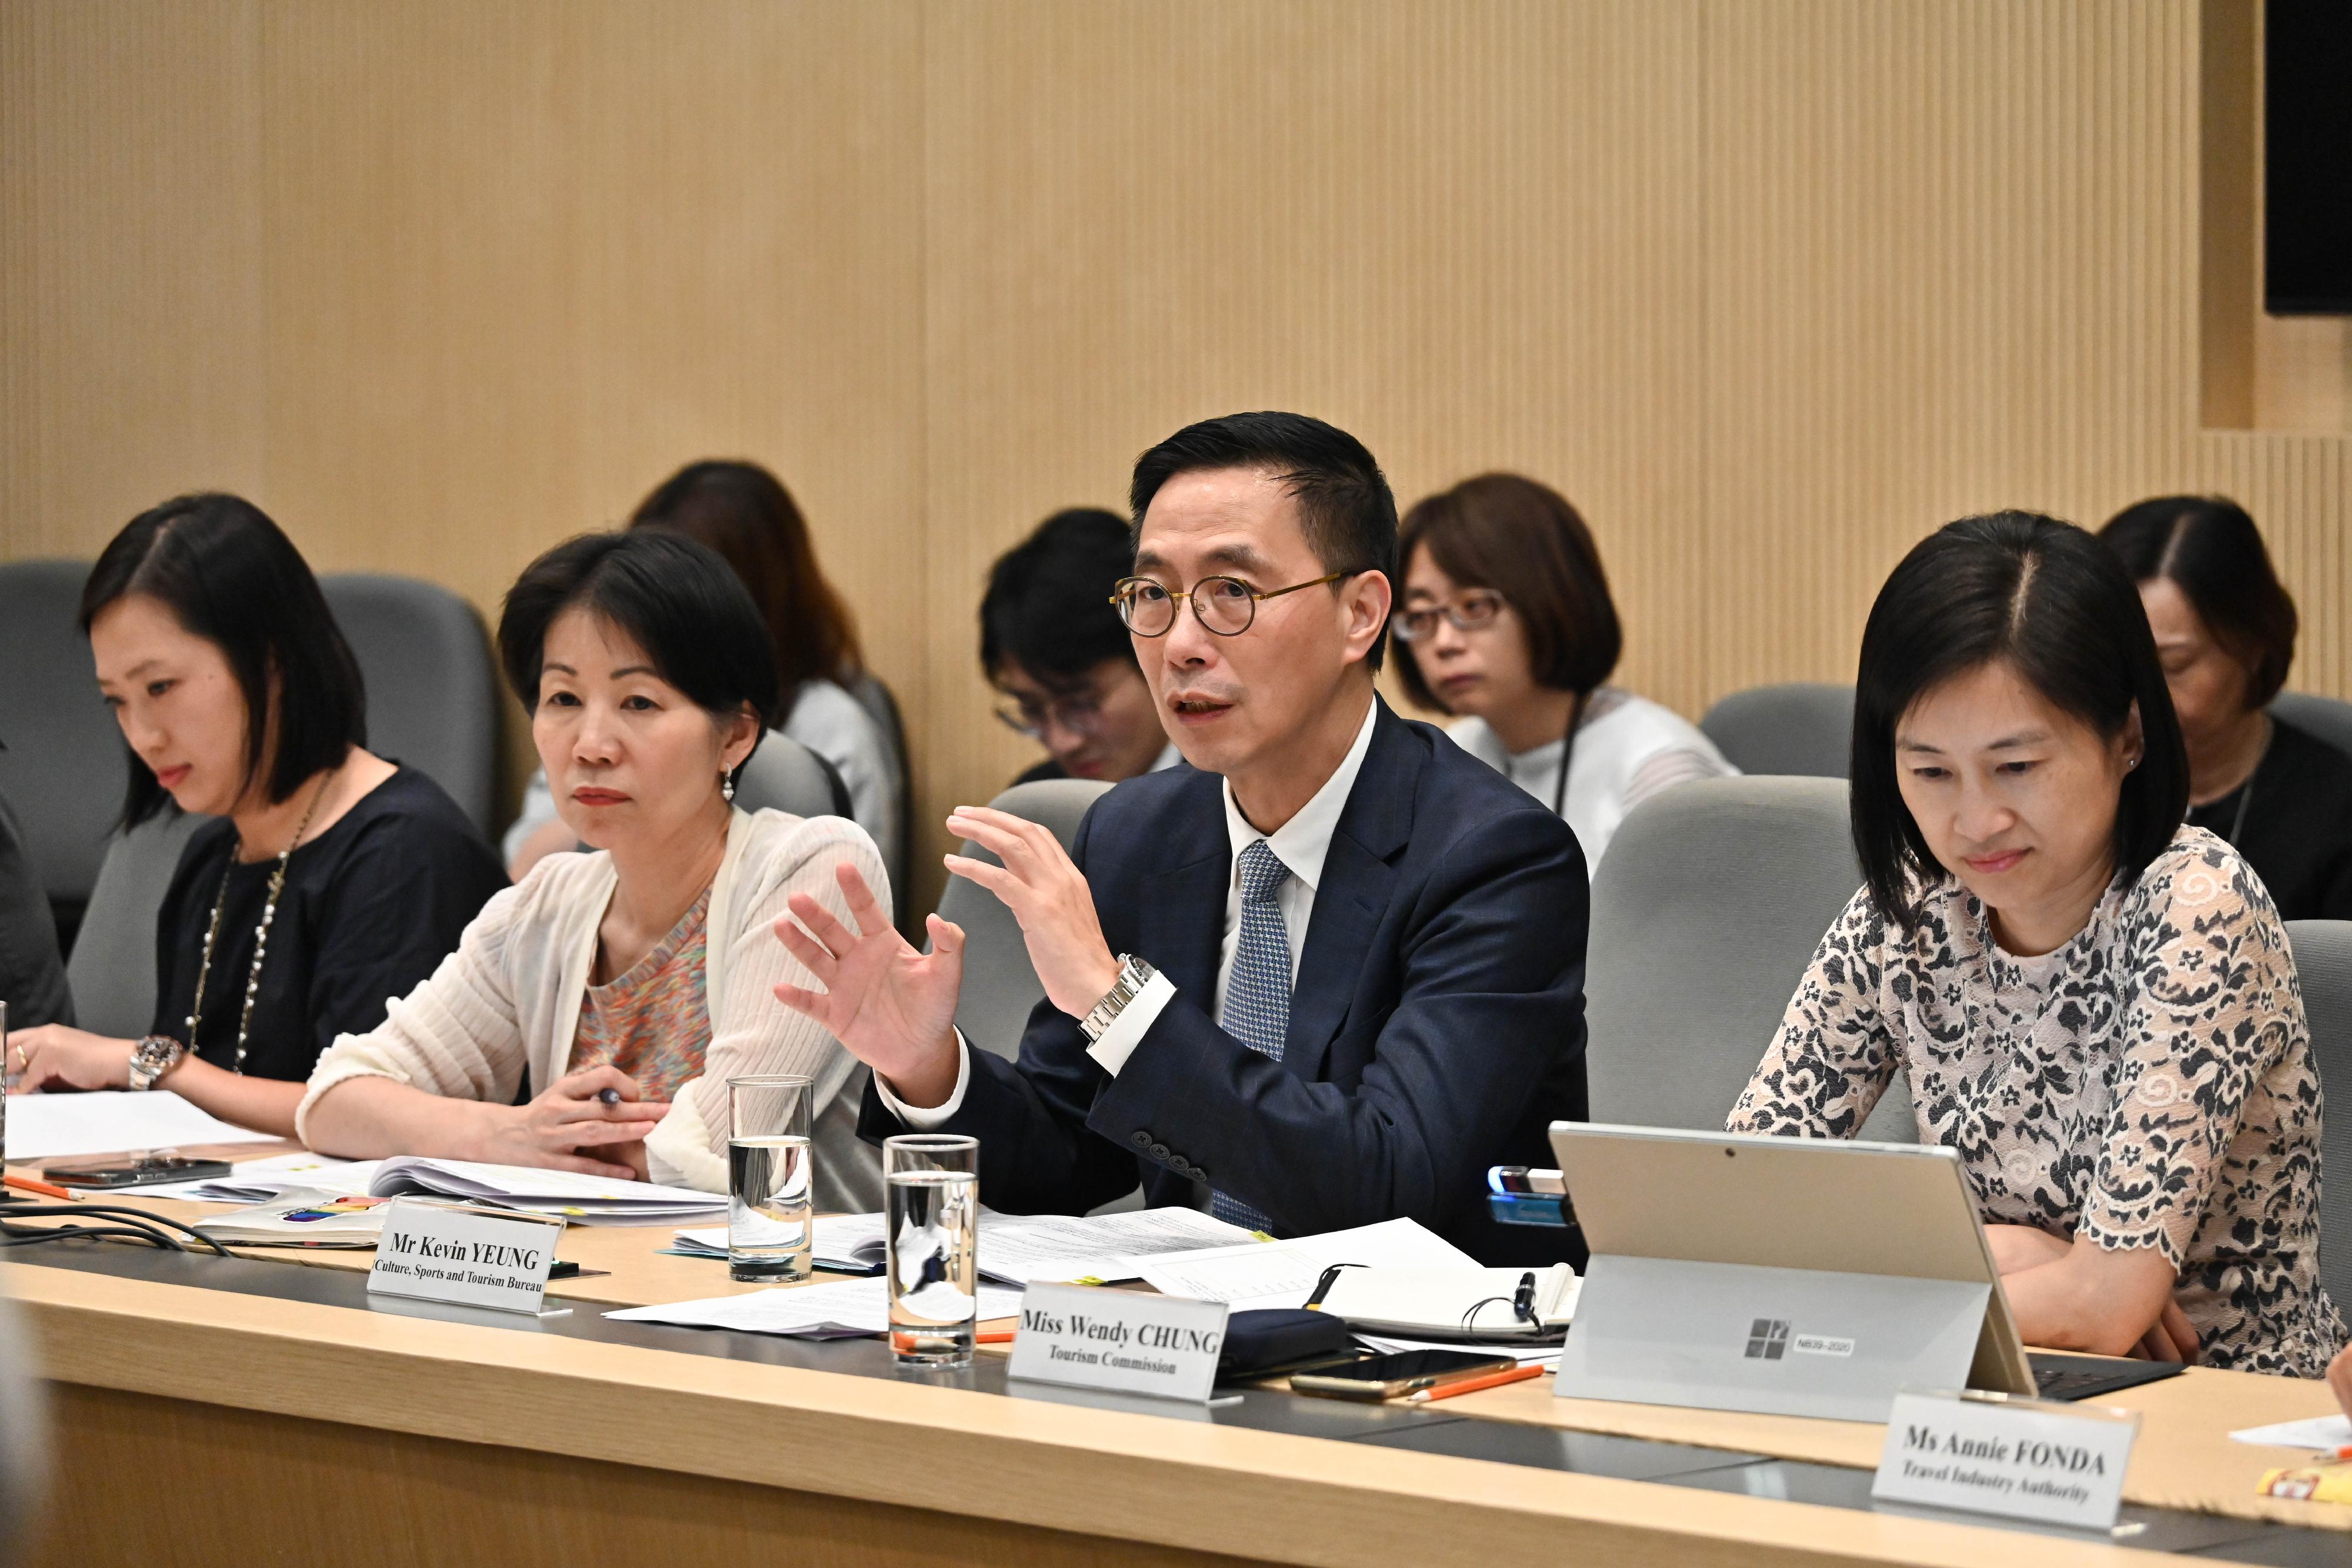 The Secretary for Culture, Sports and Tourism, Mr Kevin Yeung (second right), chaired a meeting today (September 20) to co-ordinate preparations for visitor arrivals to Hong Kong during the National Day Golden Week. Mr Yeung was briefed by representatives of various participating units on their relevant preparation work.
